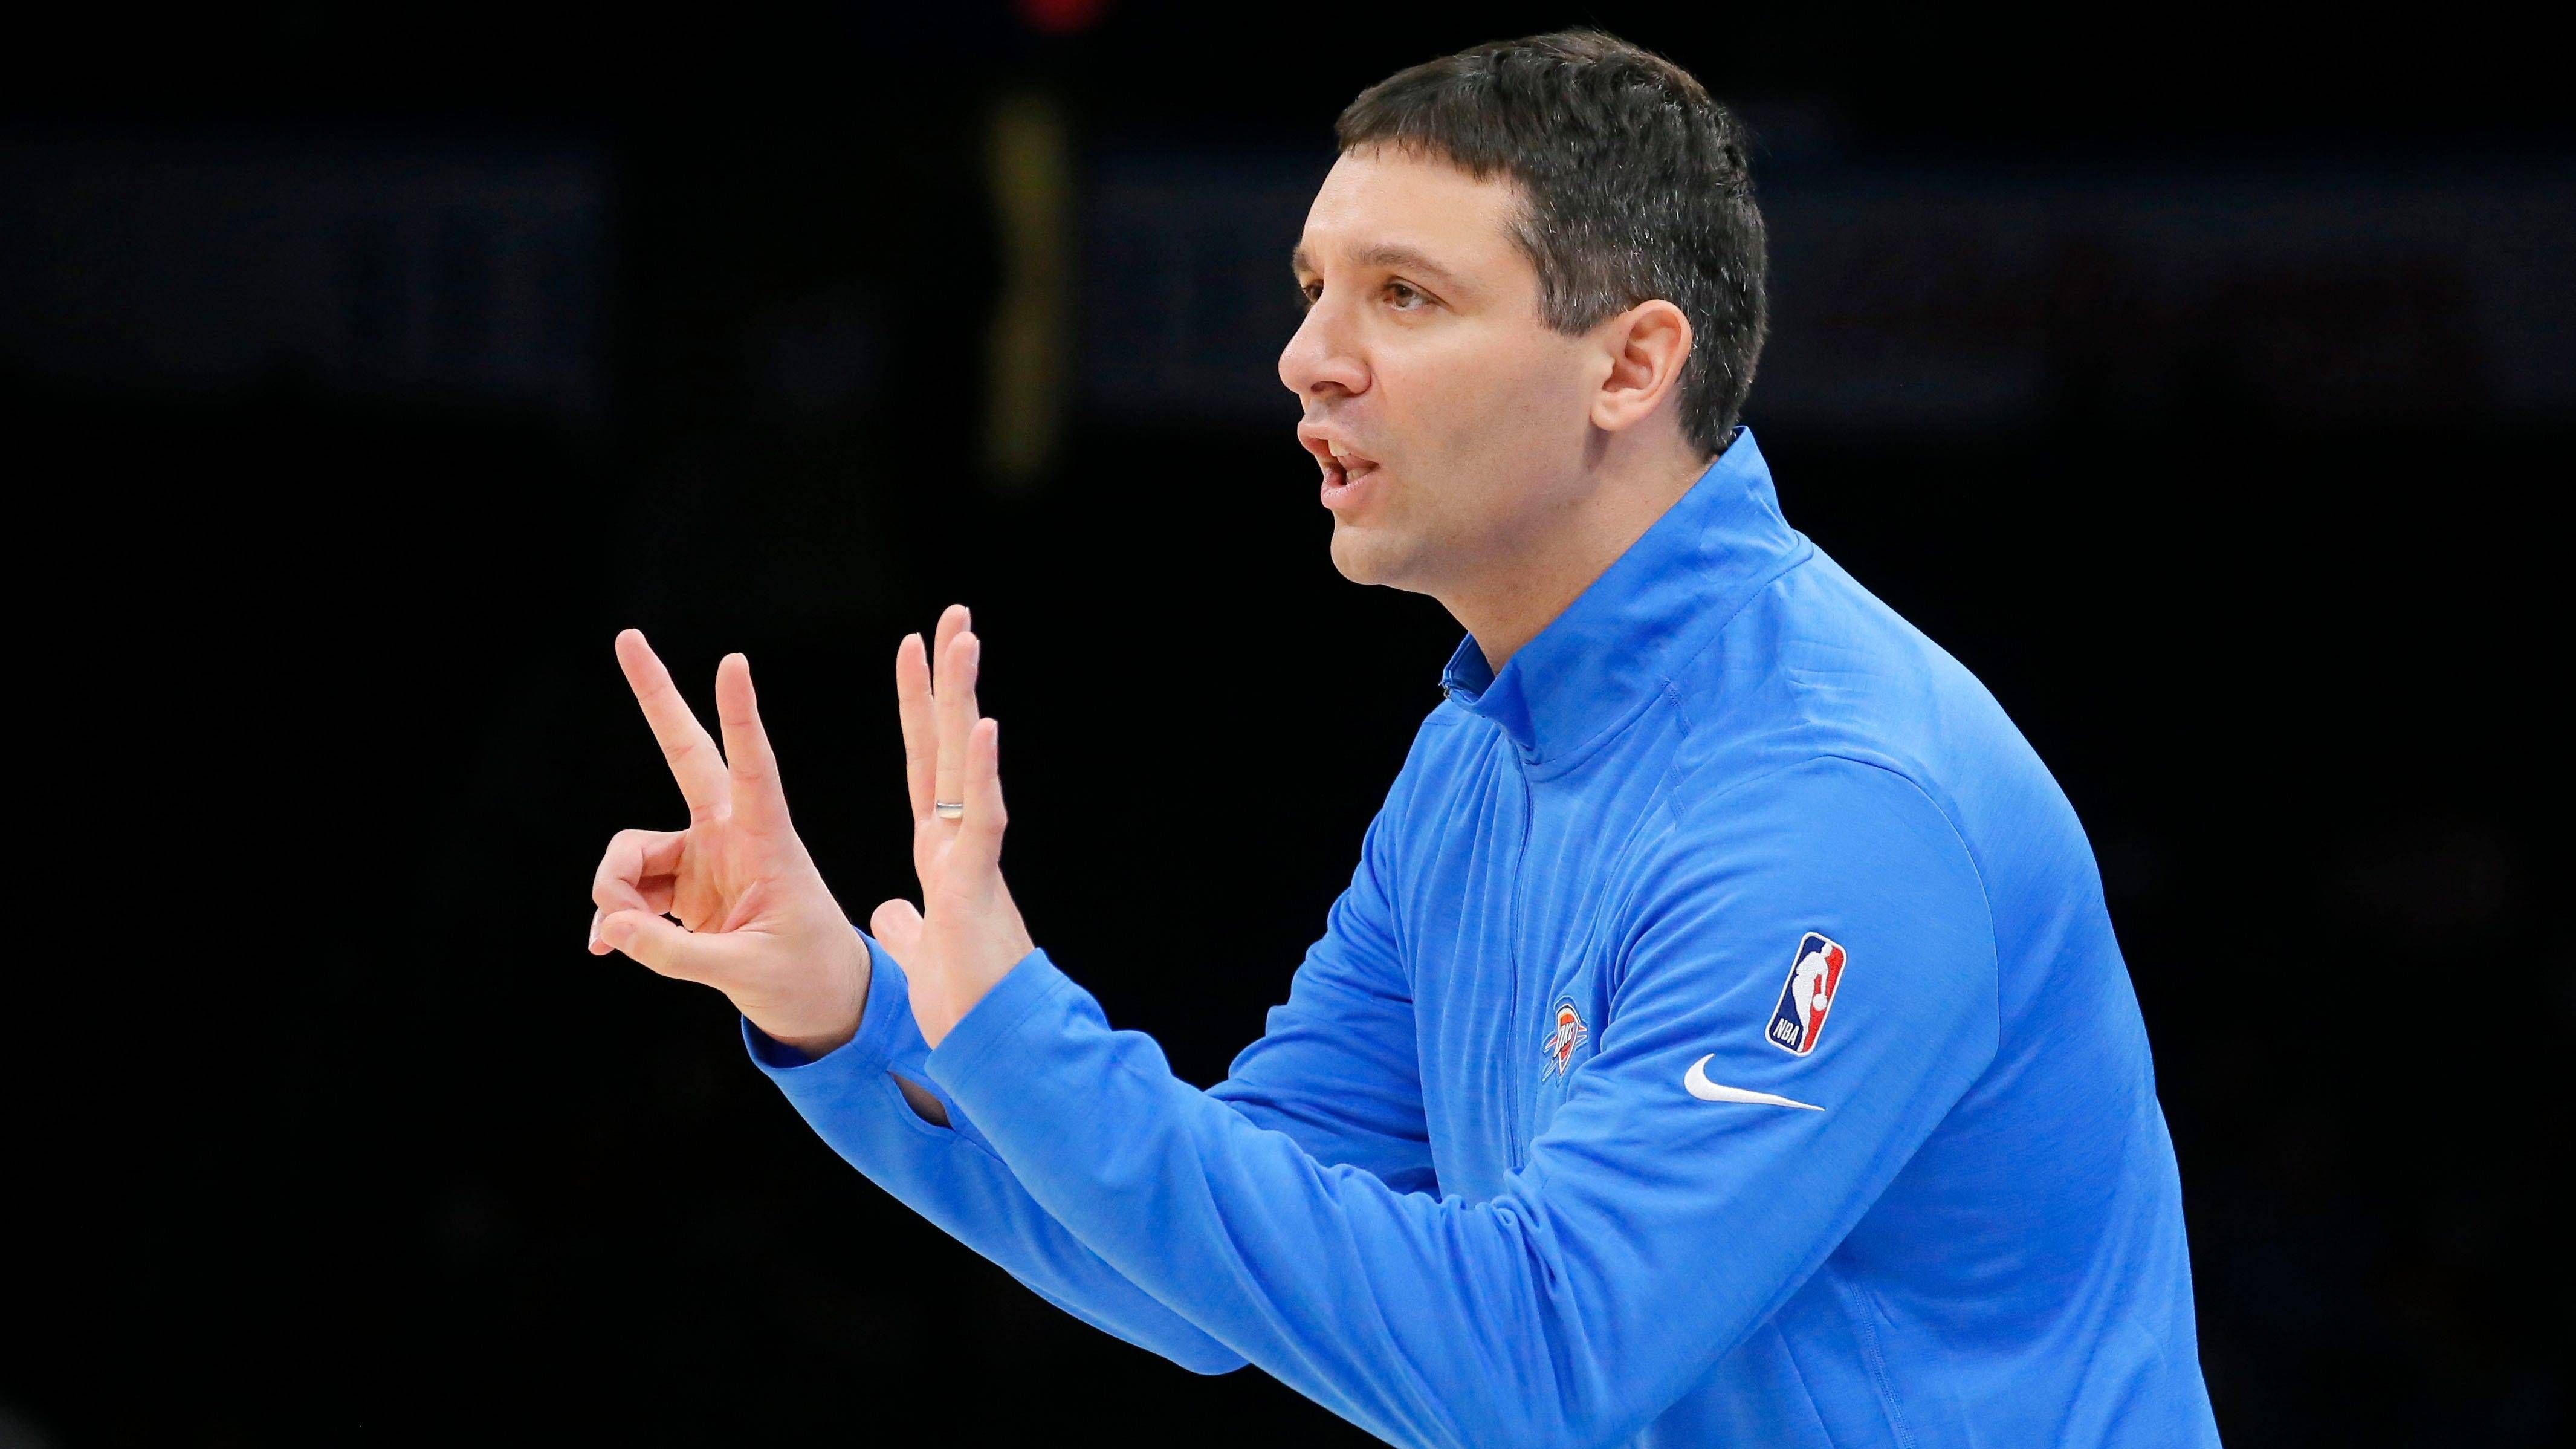 <strong>Mark Daigneault (Oklahoma City Thunder)</strong><br>Kategorie: Coach of the Year<br>Saisonbilanz: 57-25 (1. in der Western Conference)